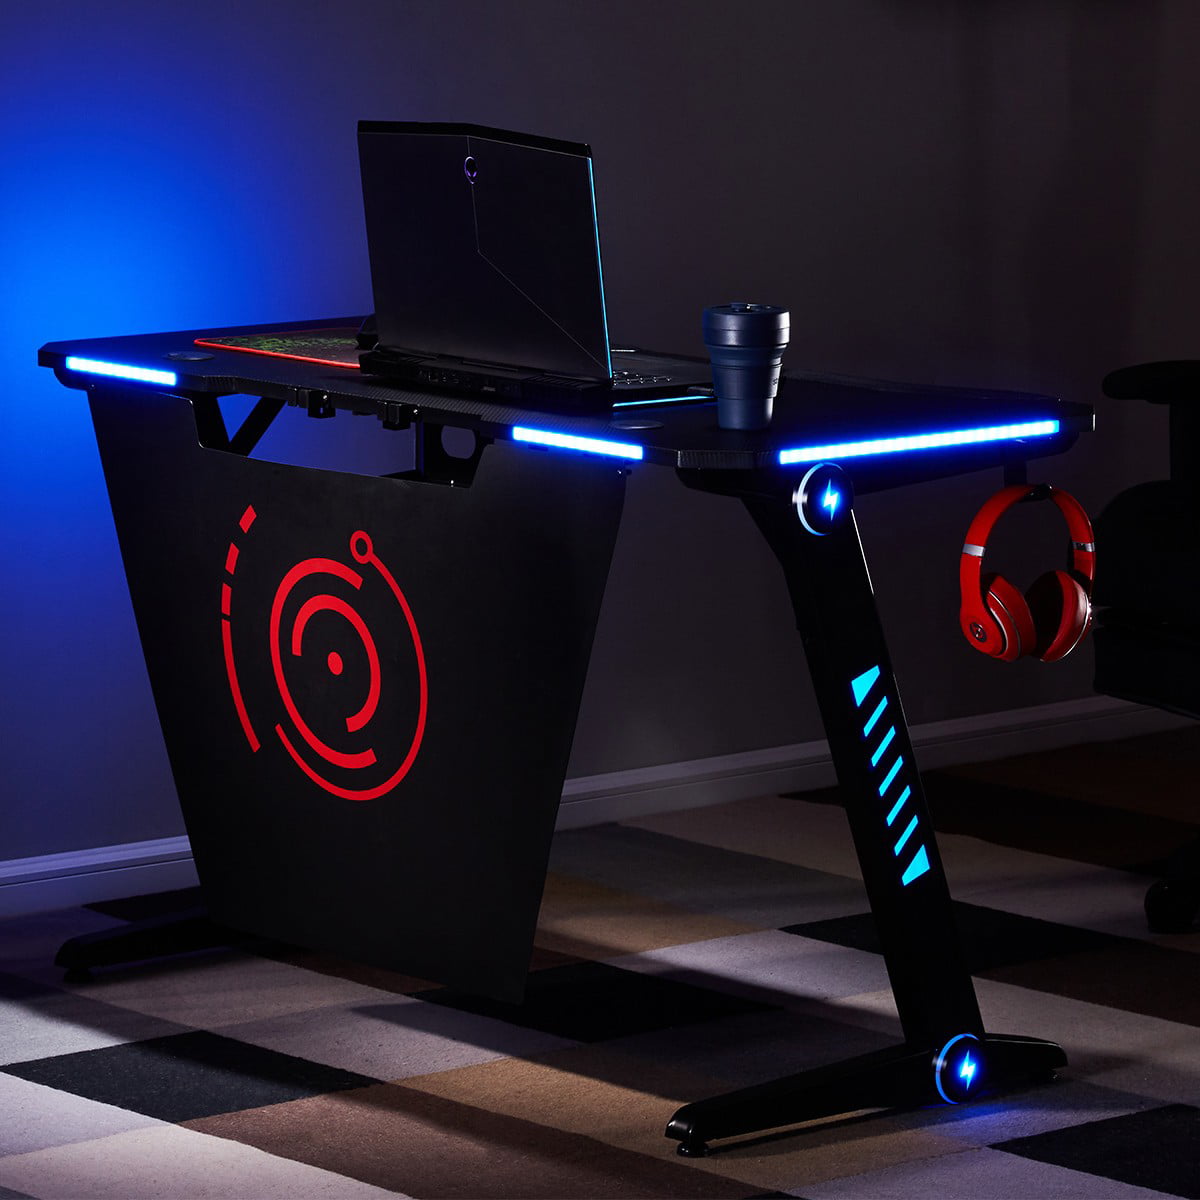 Perfect Best Rgb Lights For Gaming with Epic Design ideas